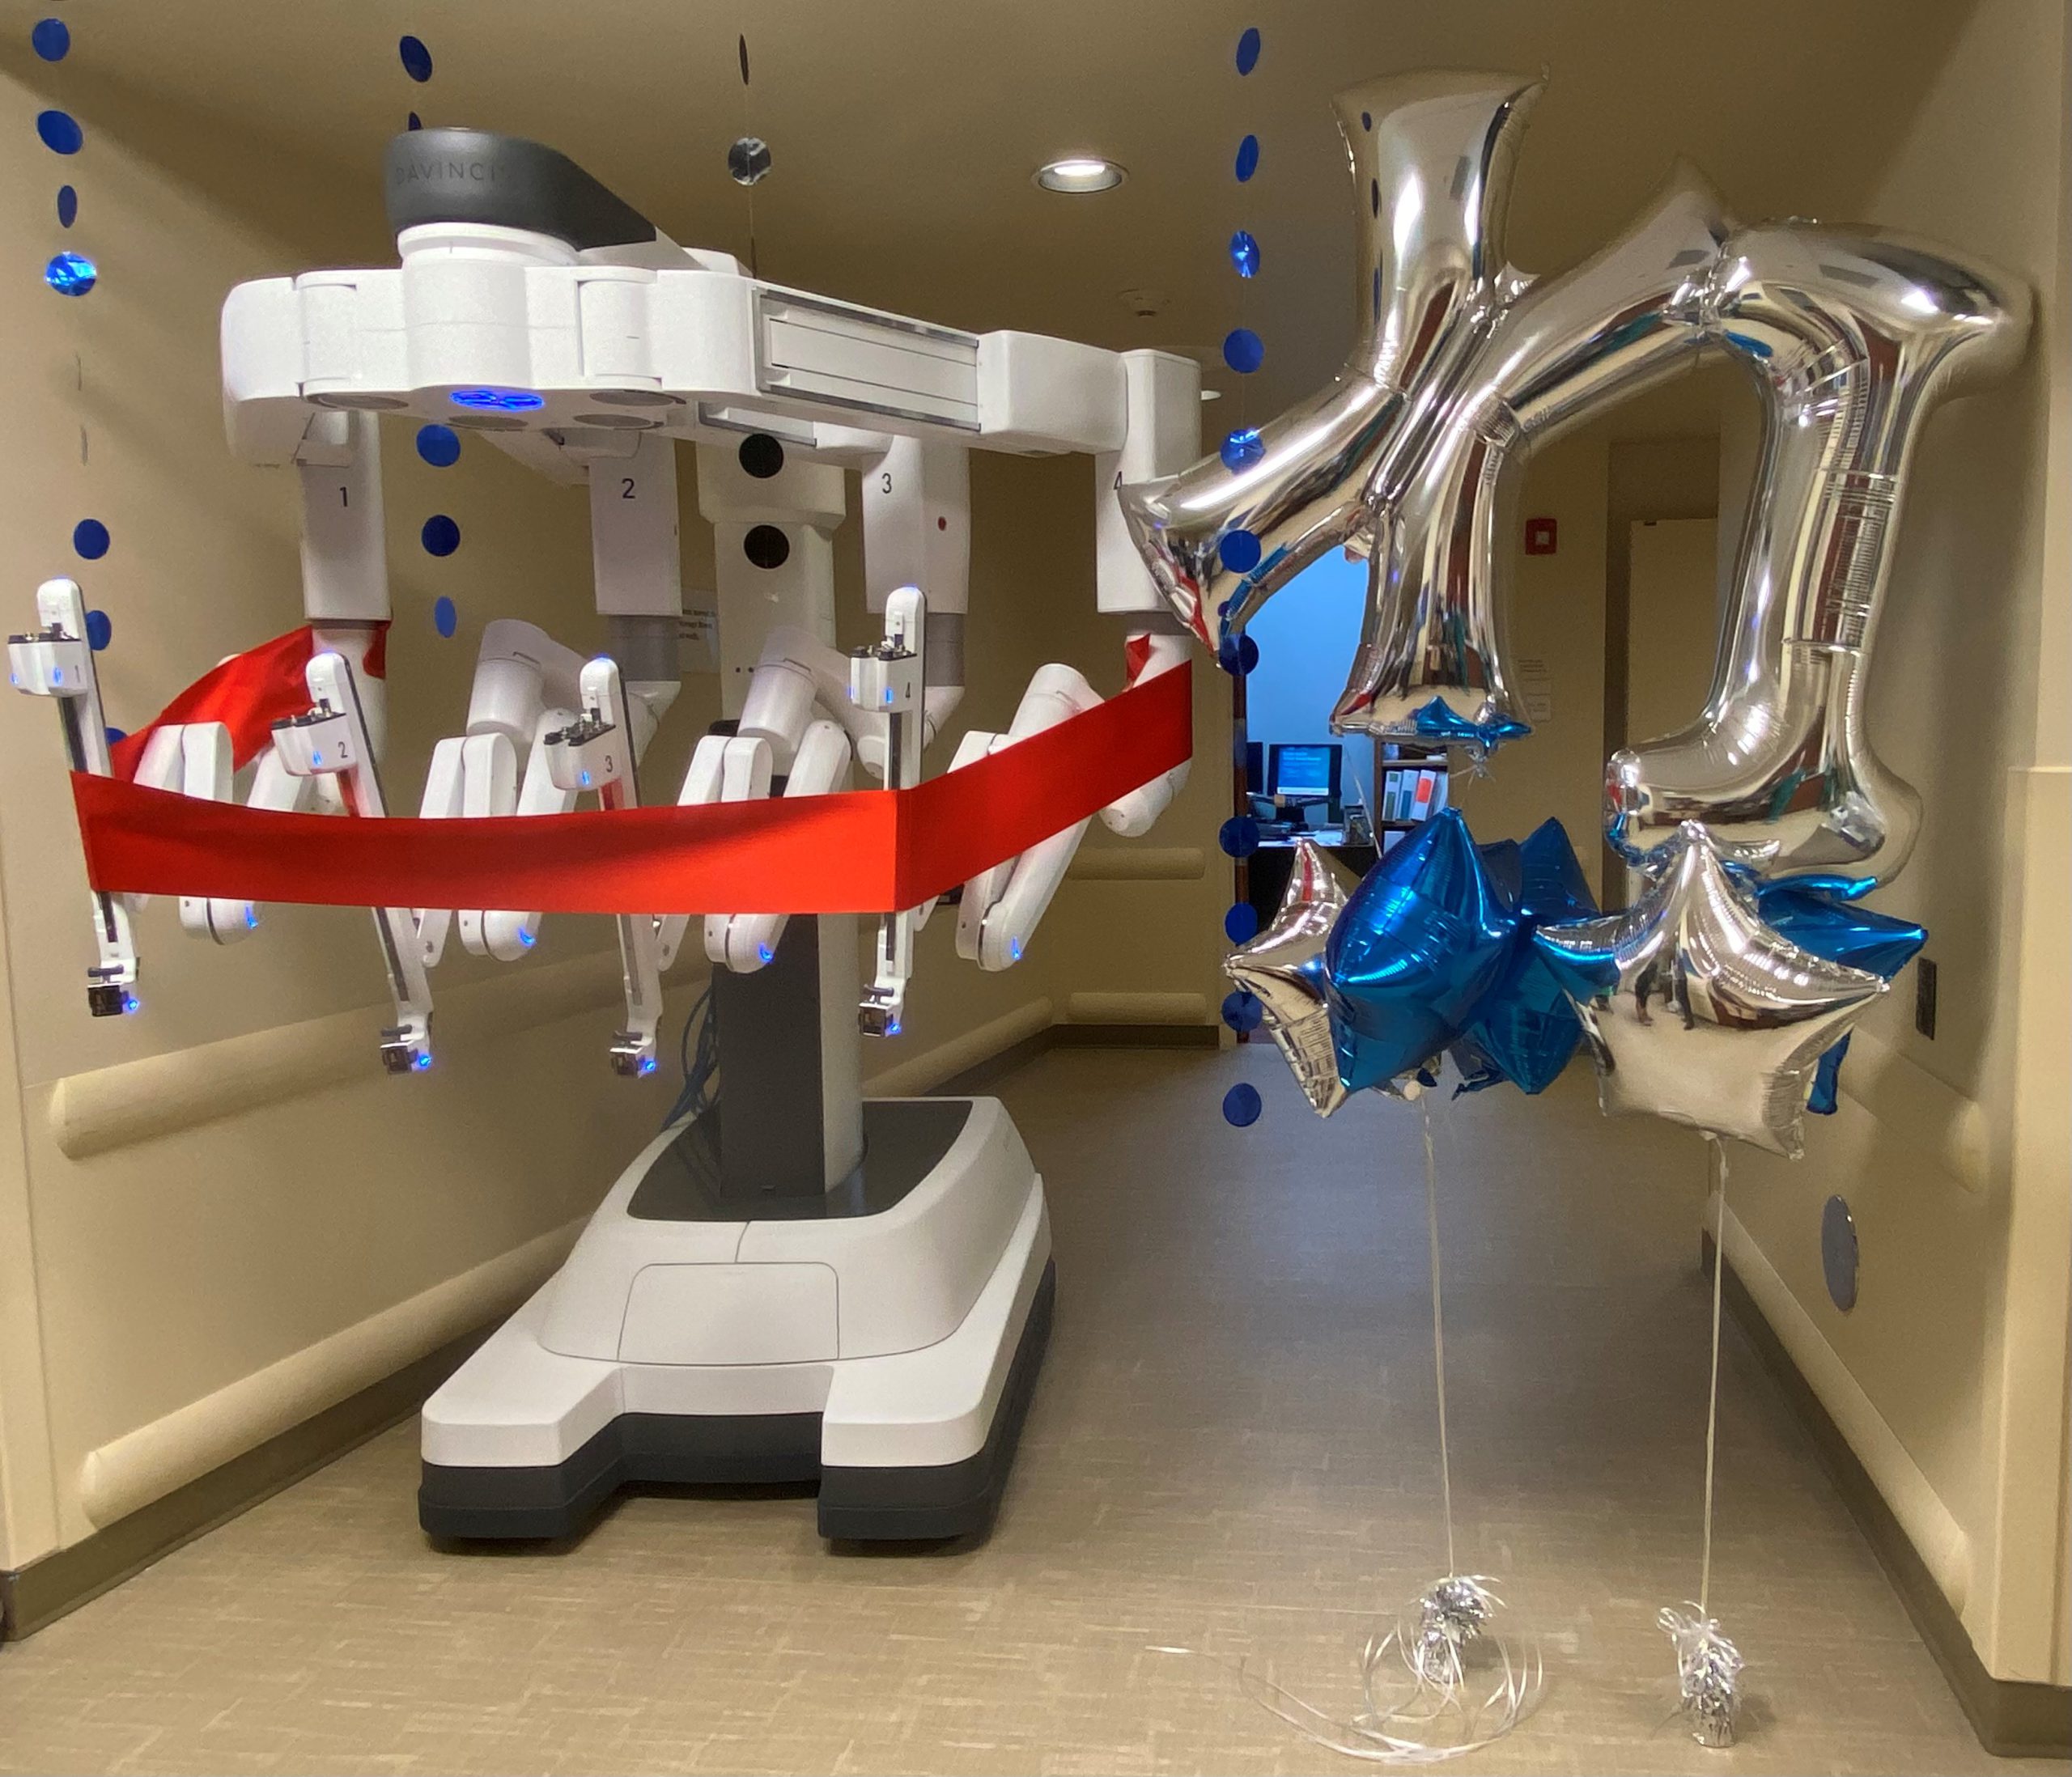 The new da Vinci Xi surgical robot with a red ribbon around its frame